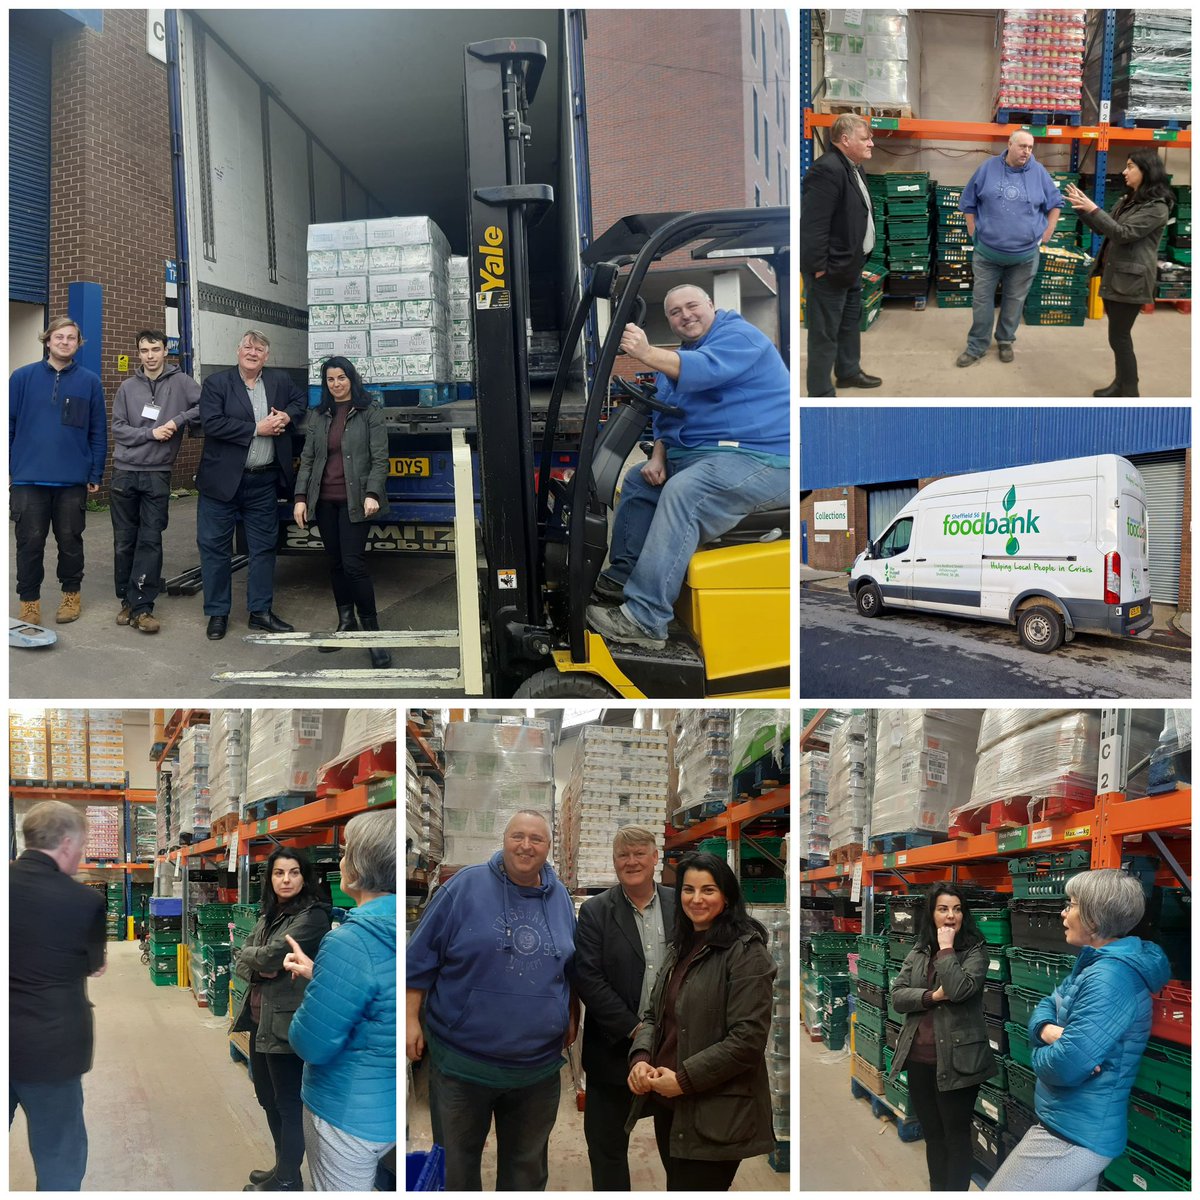 🌟 Broomhill and Sharrow Vale Ward Councillors: Brian Holmshaw, Angela Argenzio, Maleiki Haybe visited @S6Foodbank to see firsthand the essential support they provide to communities. Cllrs recently approved funds to support the Foodbank deliver vital services in the ward ❤️